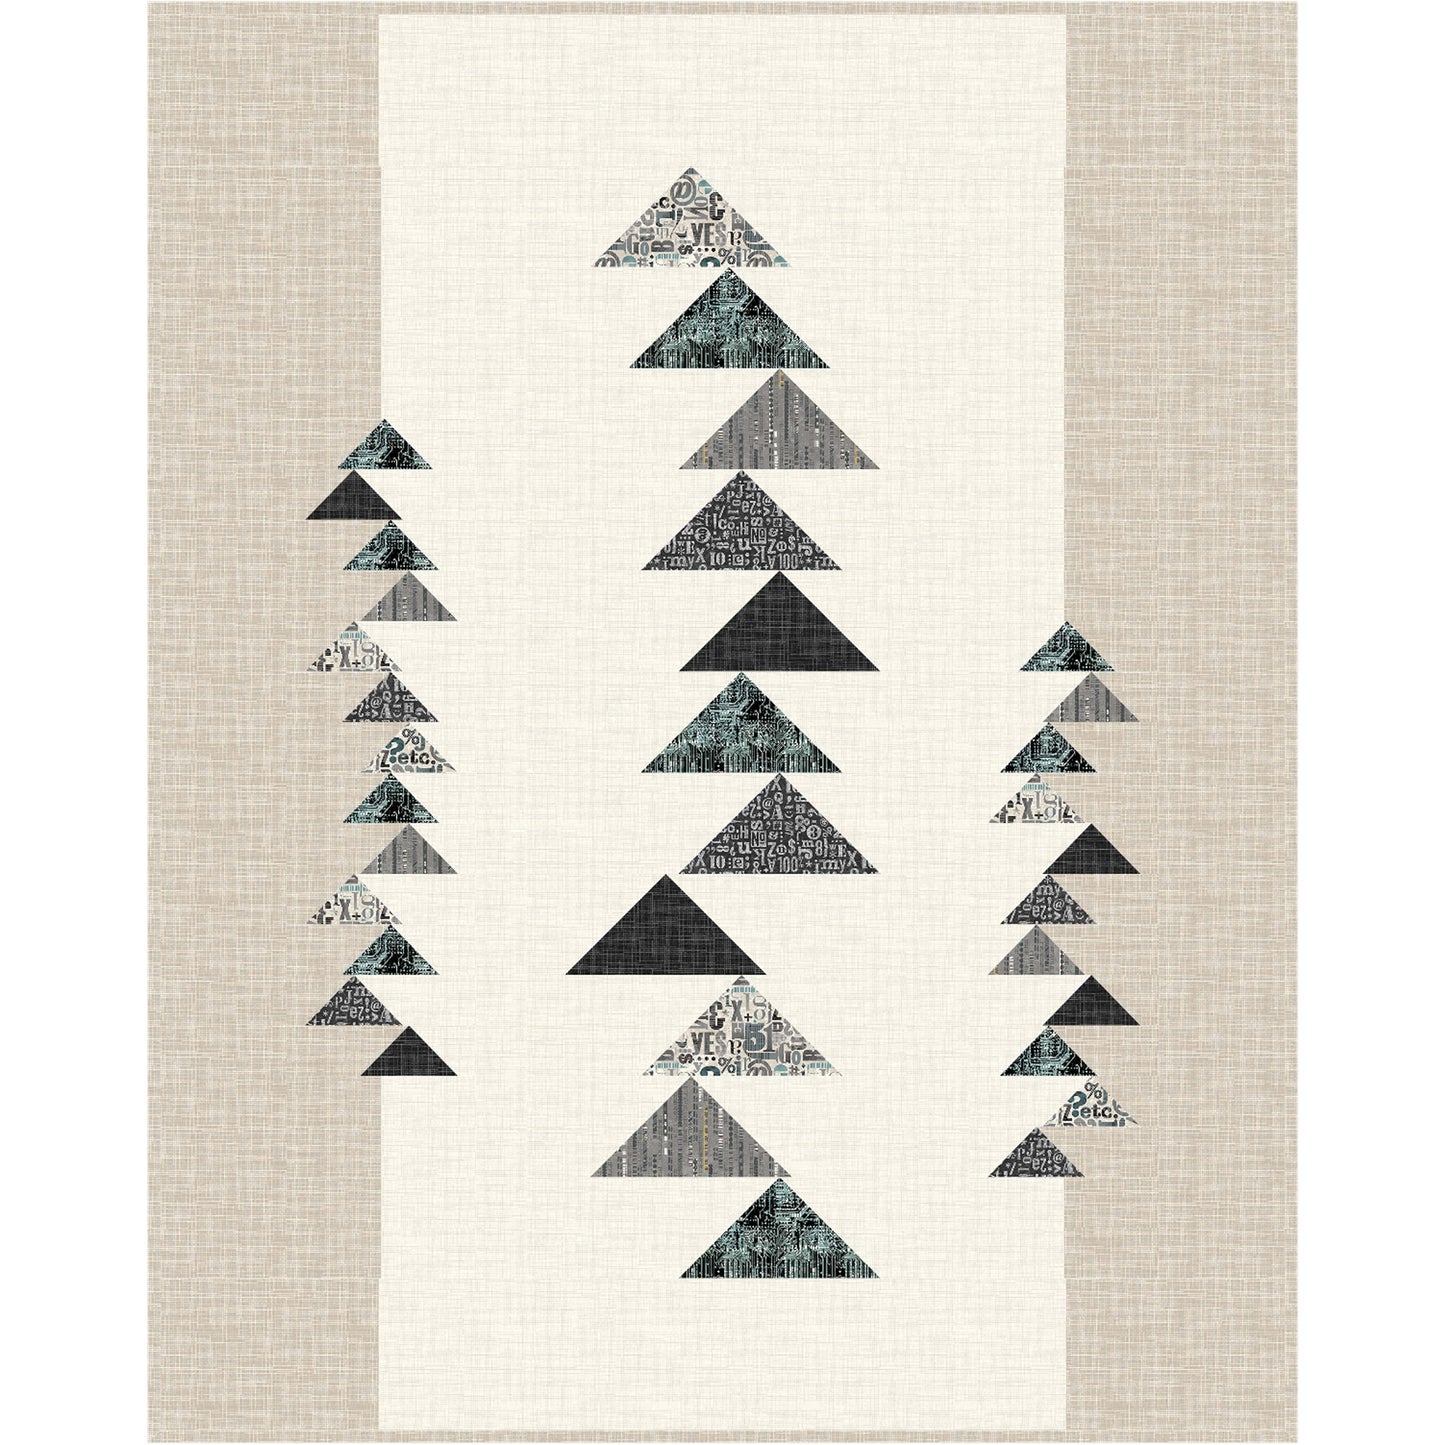 A quilt with colorful triangles with background of cream in the middle and tan on right and left.